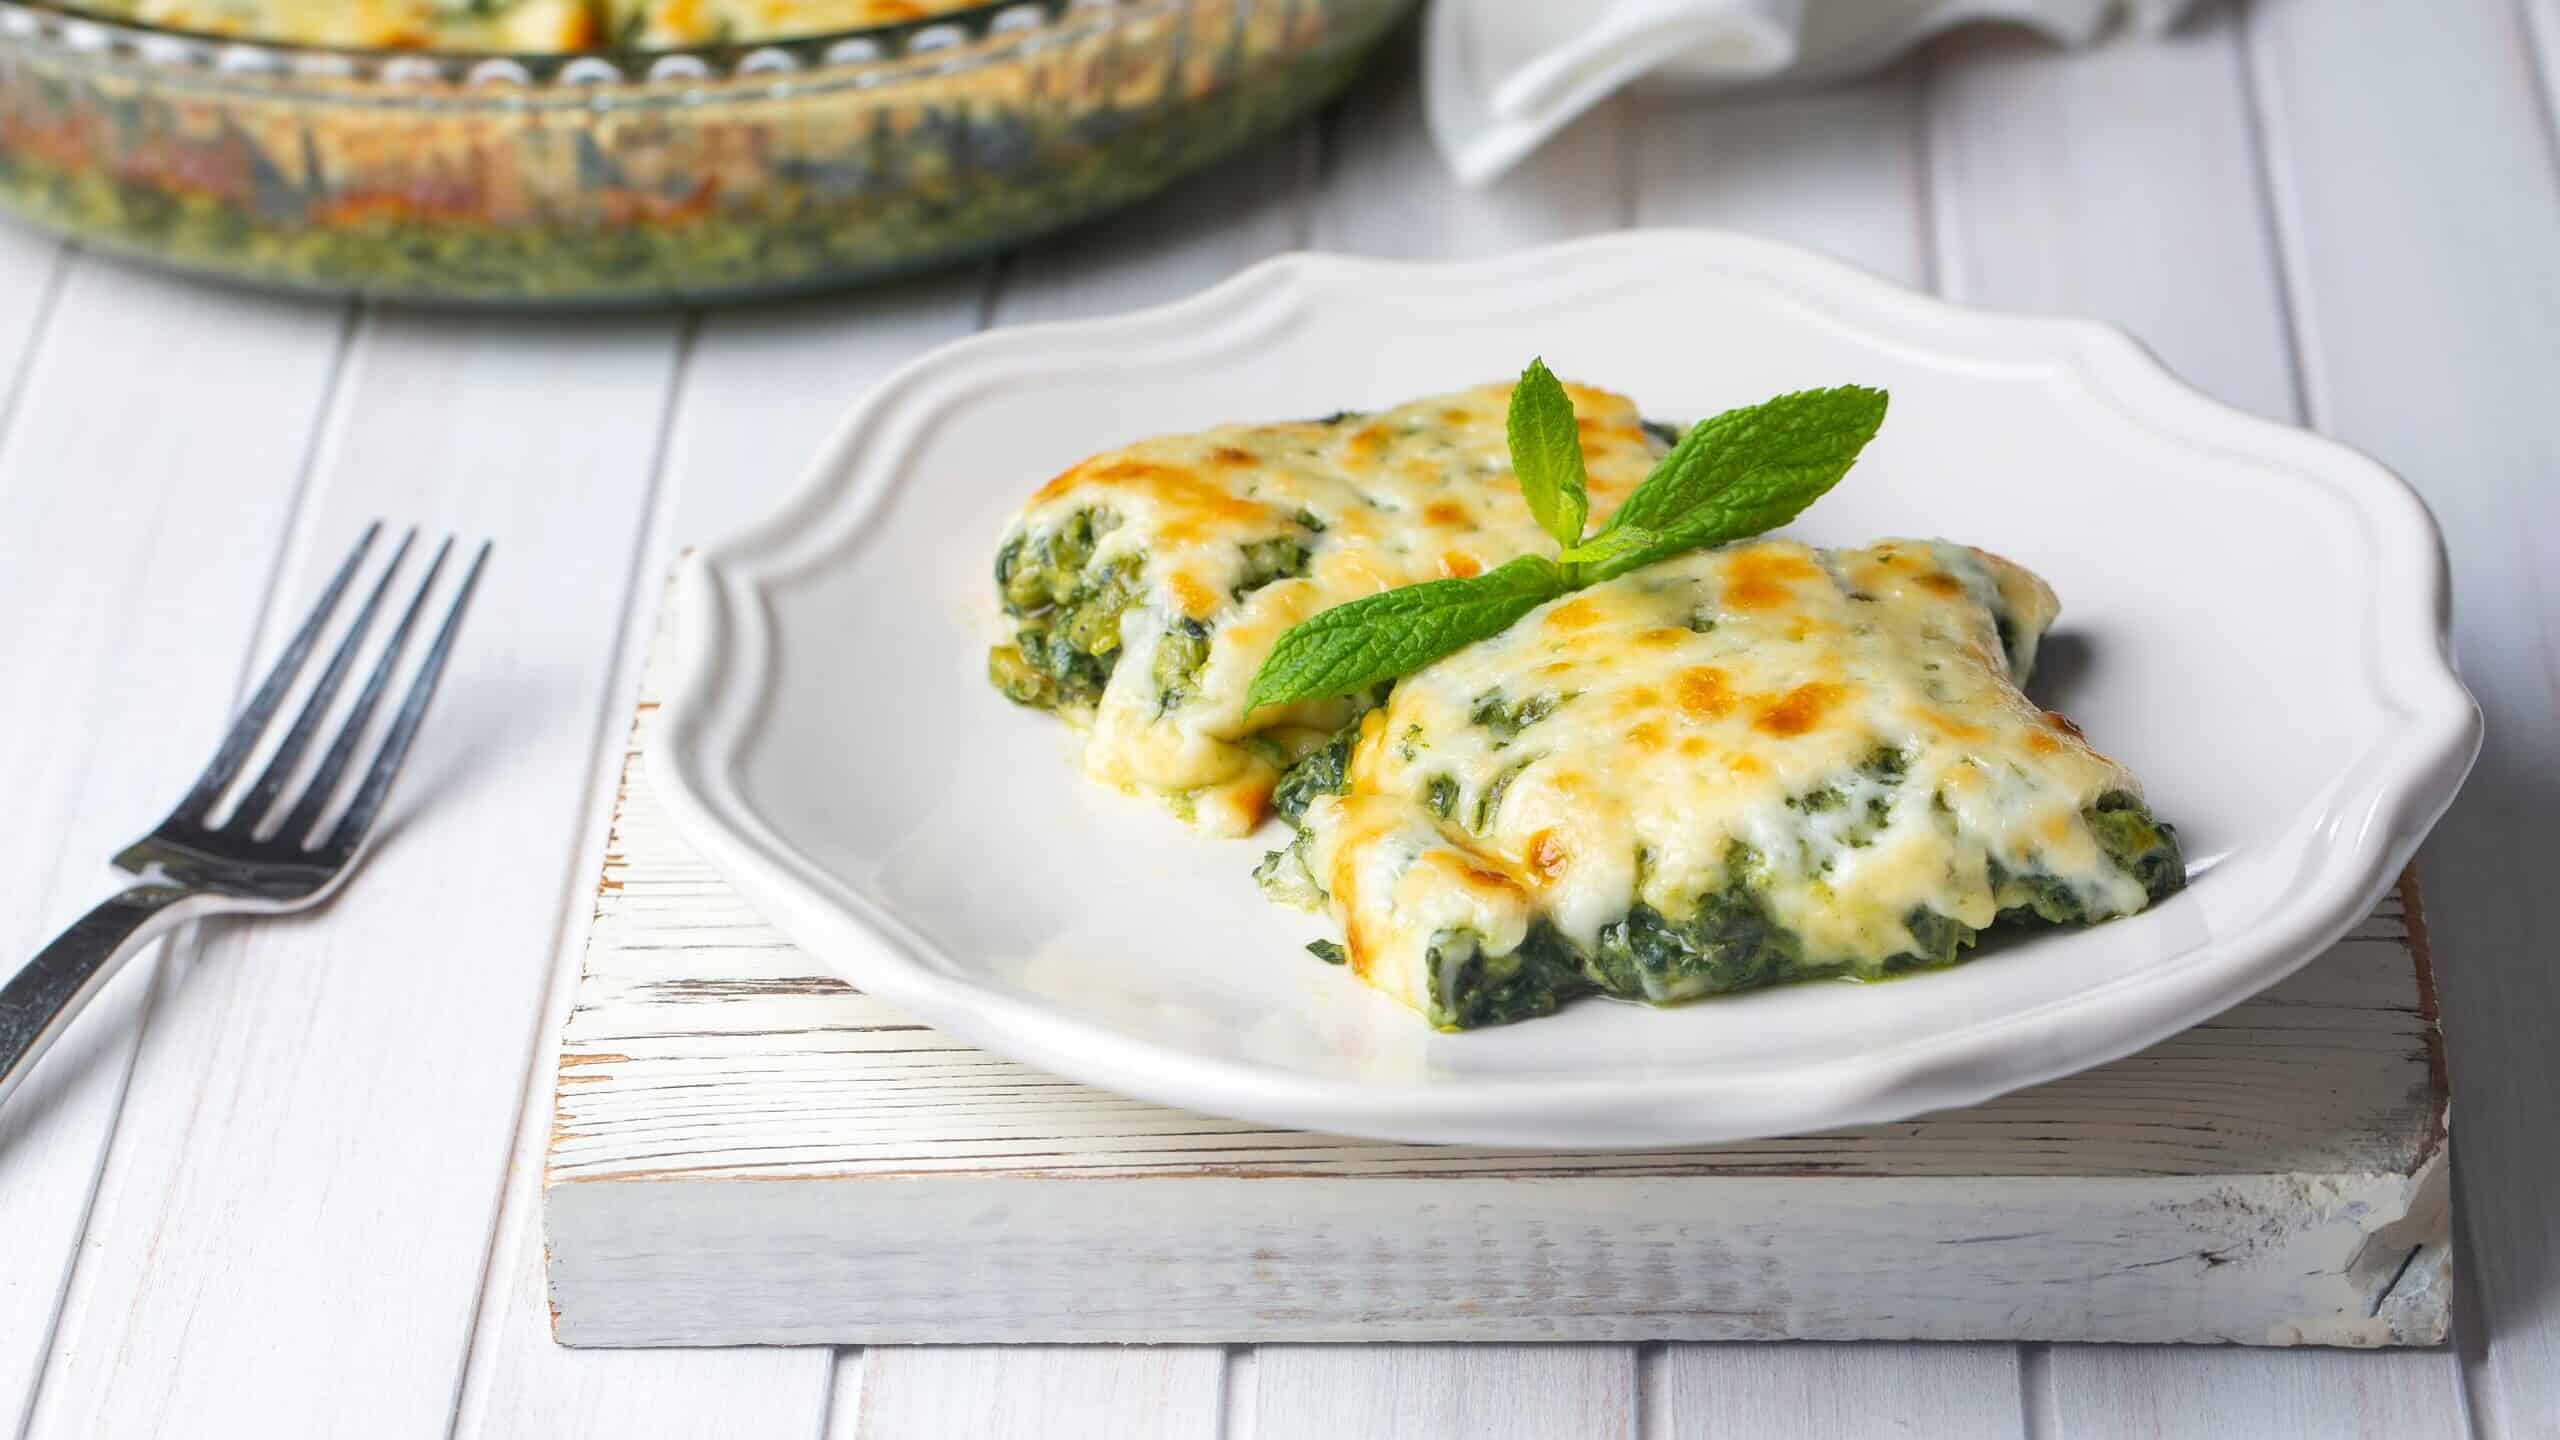 Baked Spinach with cheese is delicious Italian food cuisine. Spinach gratin.